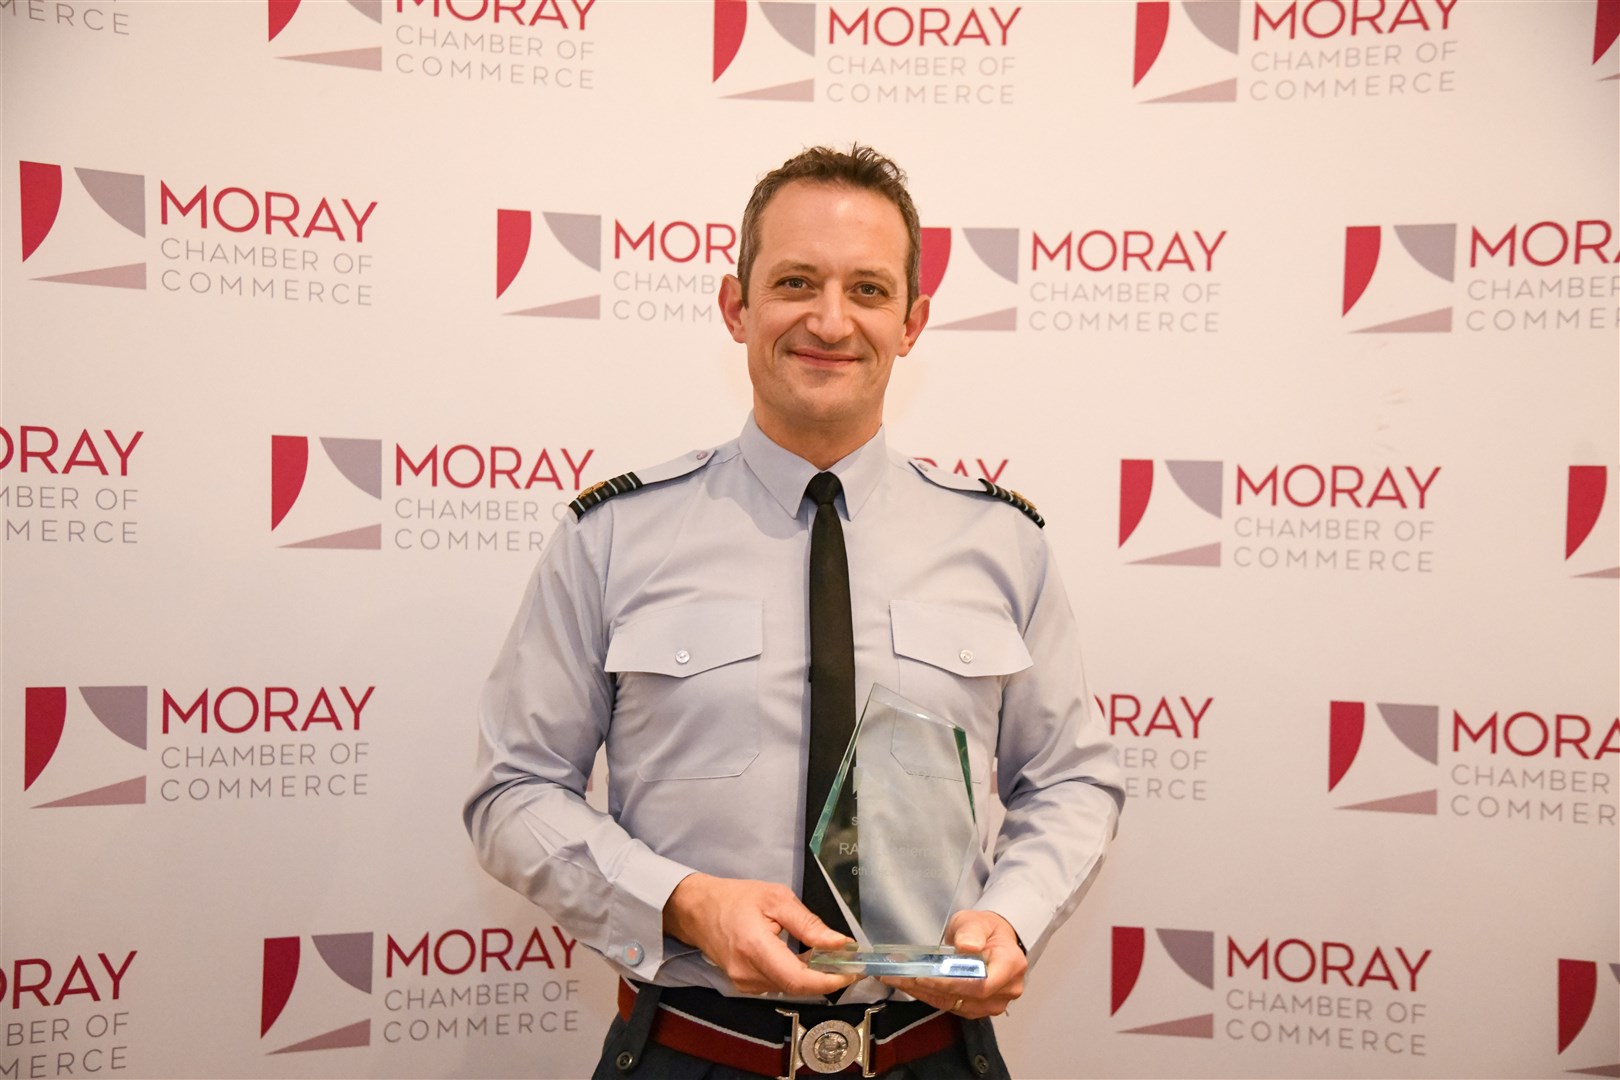 Station Commander Jim Lee representing RAF Lossiemouth who was awarded the Speical Recognition Award. ..Moray Chamber of Commerce Annual Awards Evening at The Seafield Arms, Cullen 2023...Picture: Beth Taylor.